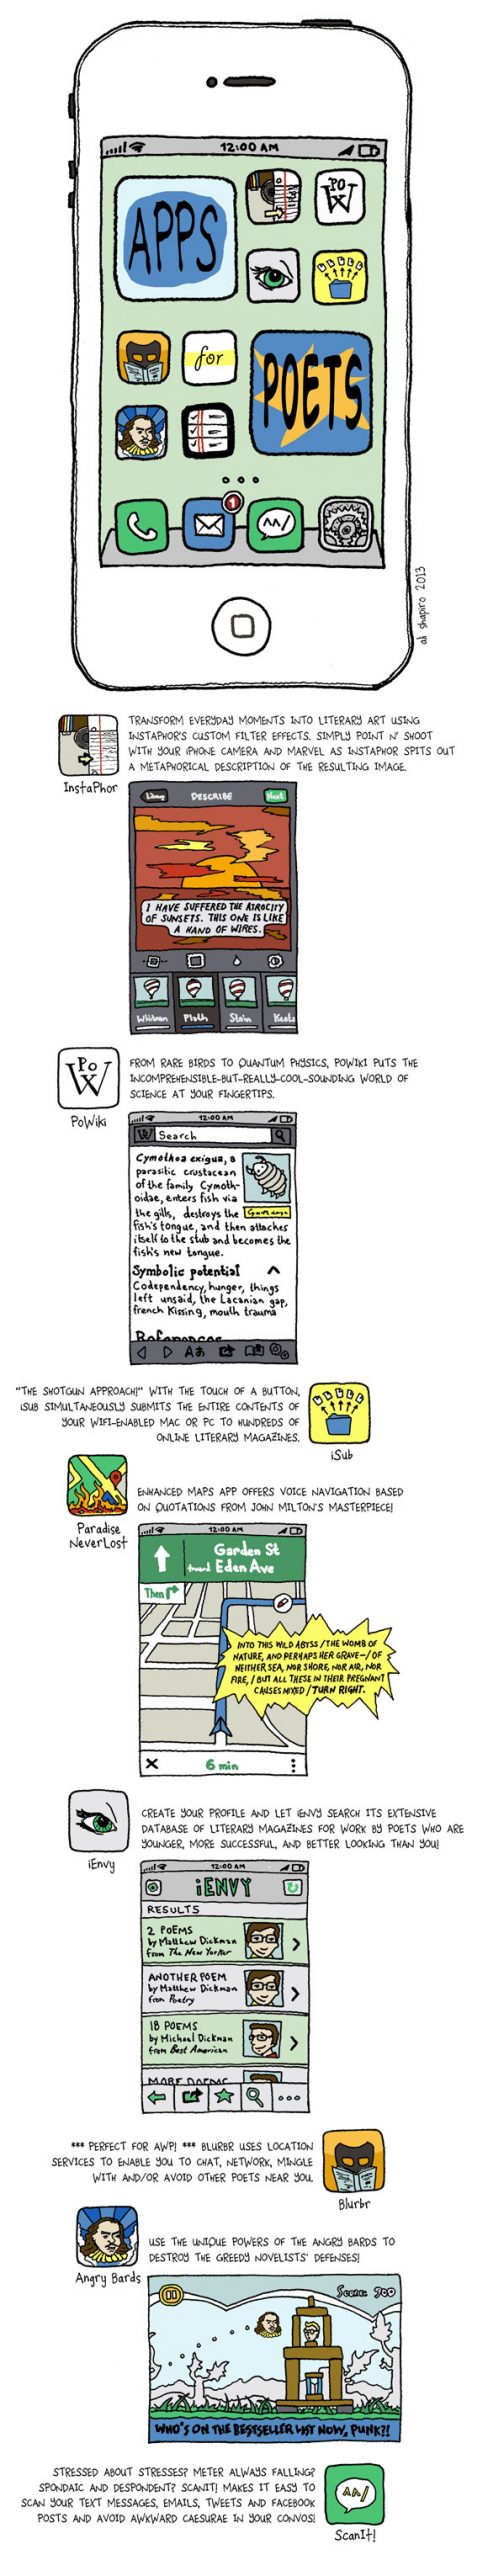 Apps for Poets! – Comic